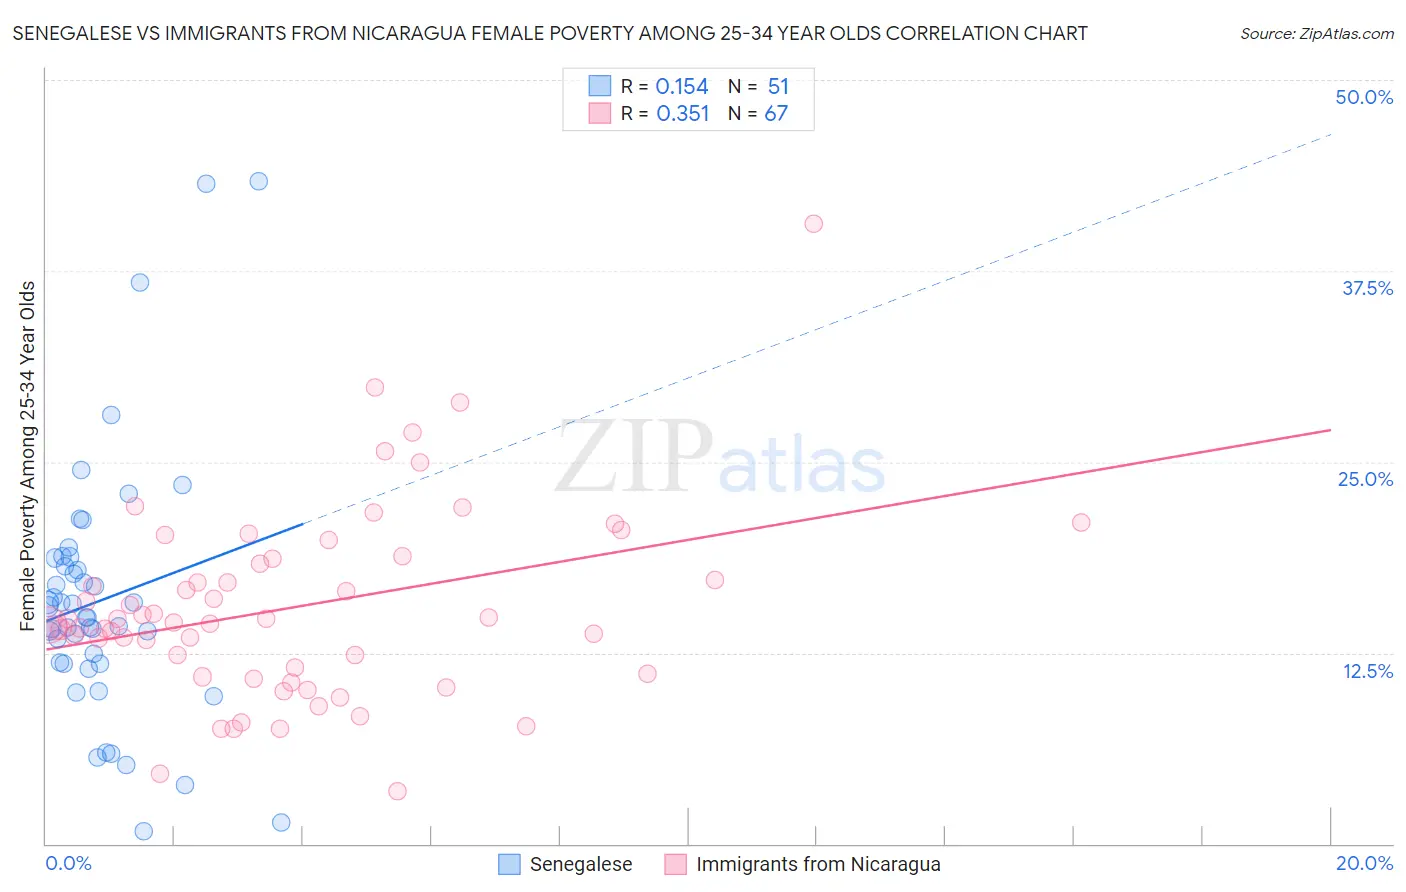 Senegalese vs Immigrants from Nicaragua Female Poverty Among 25-34 Year Olds